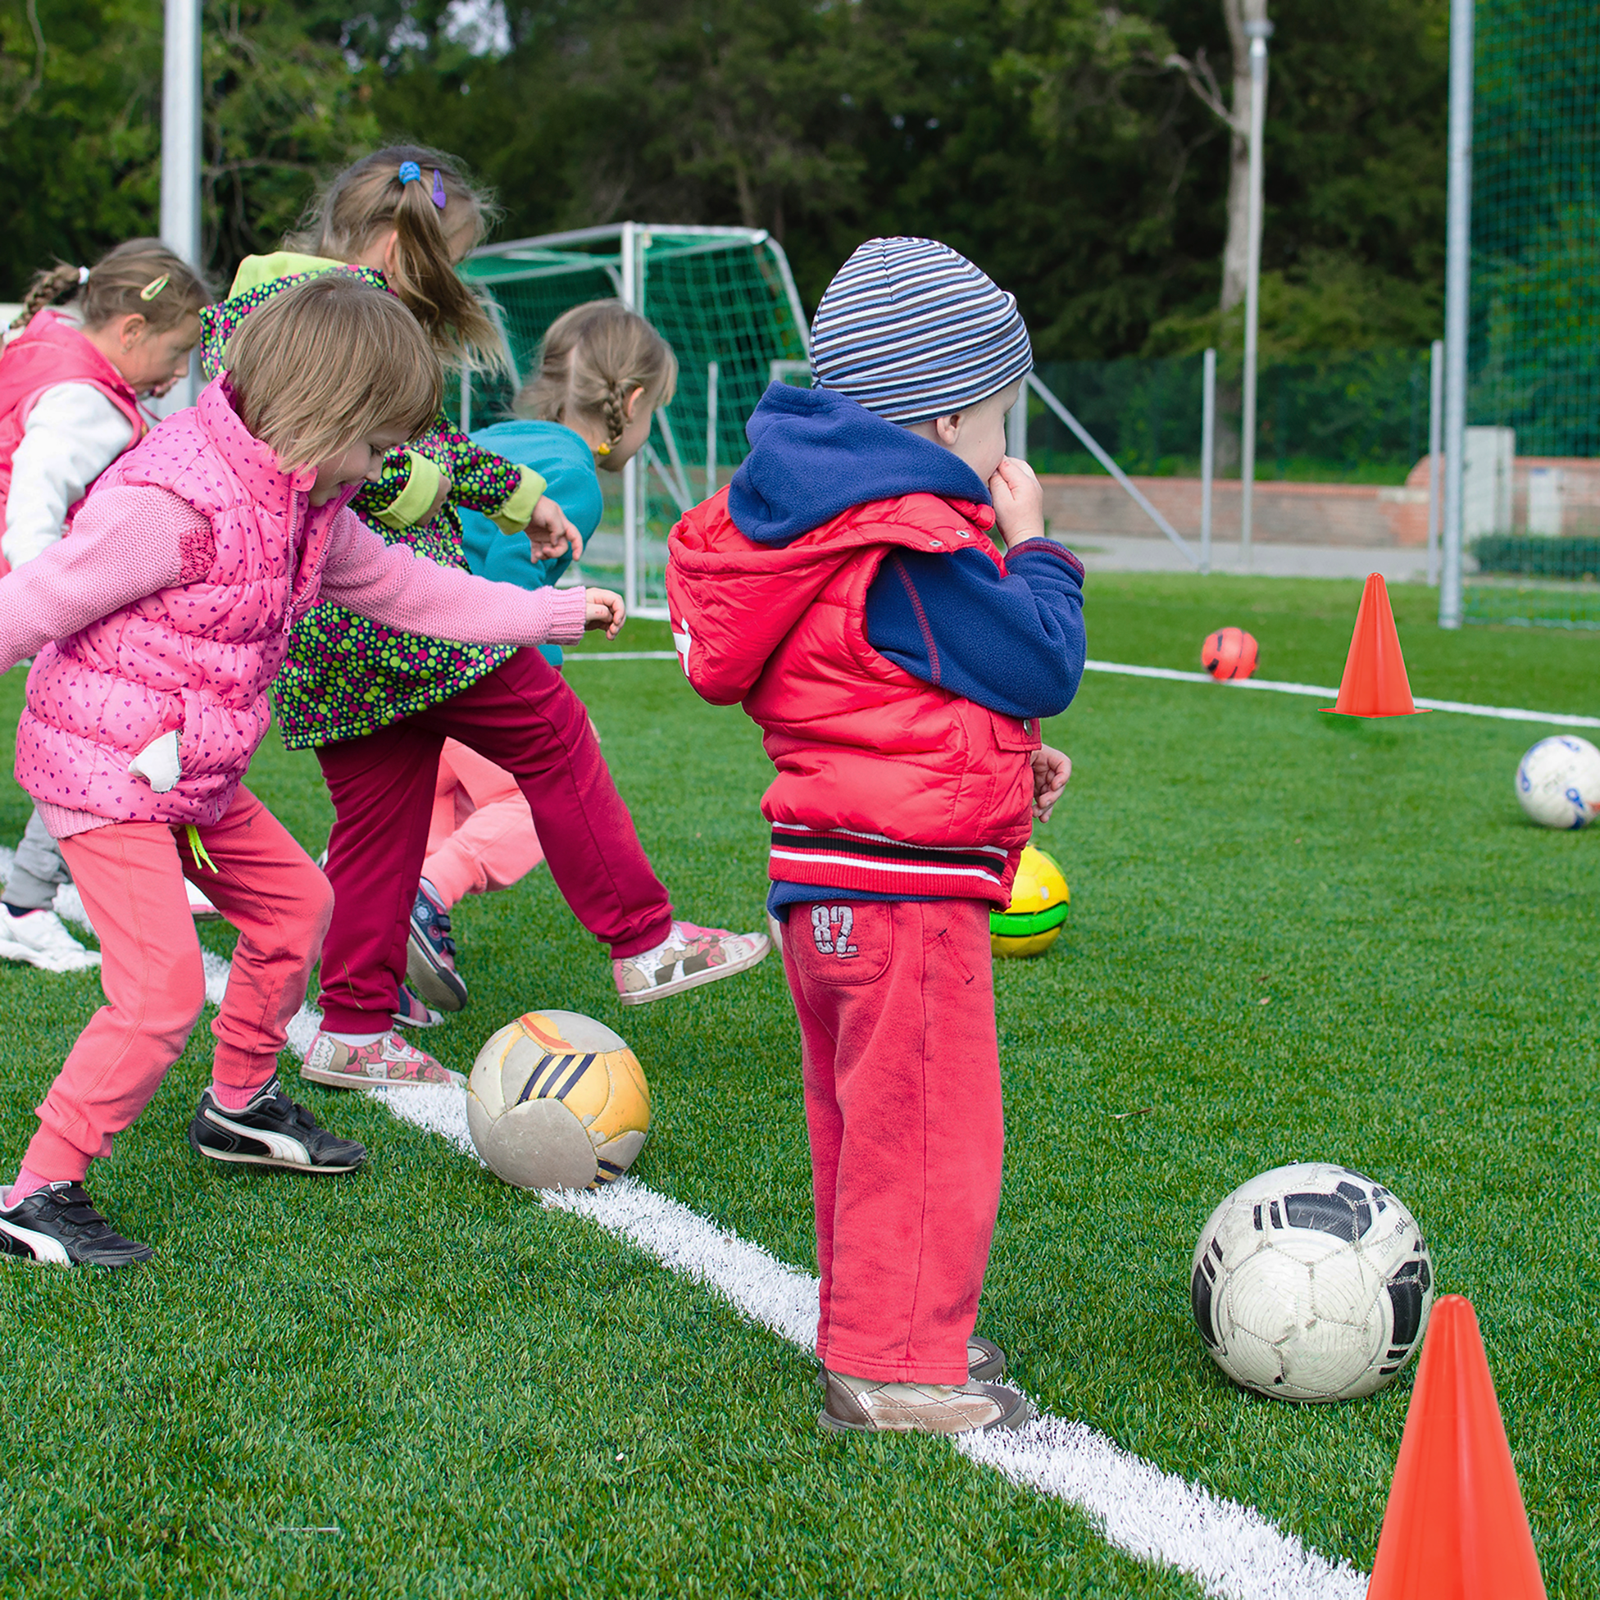 A group of kids playing in a field marked with several orange sport training cones